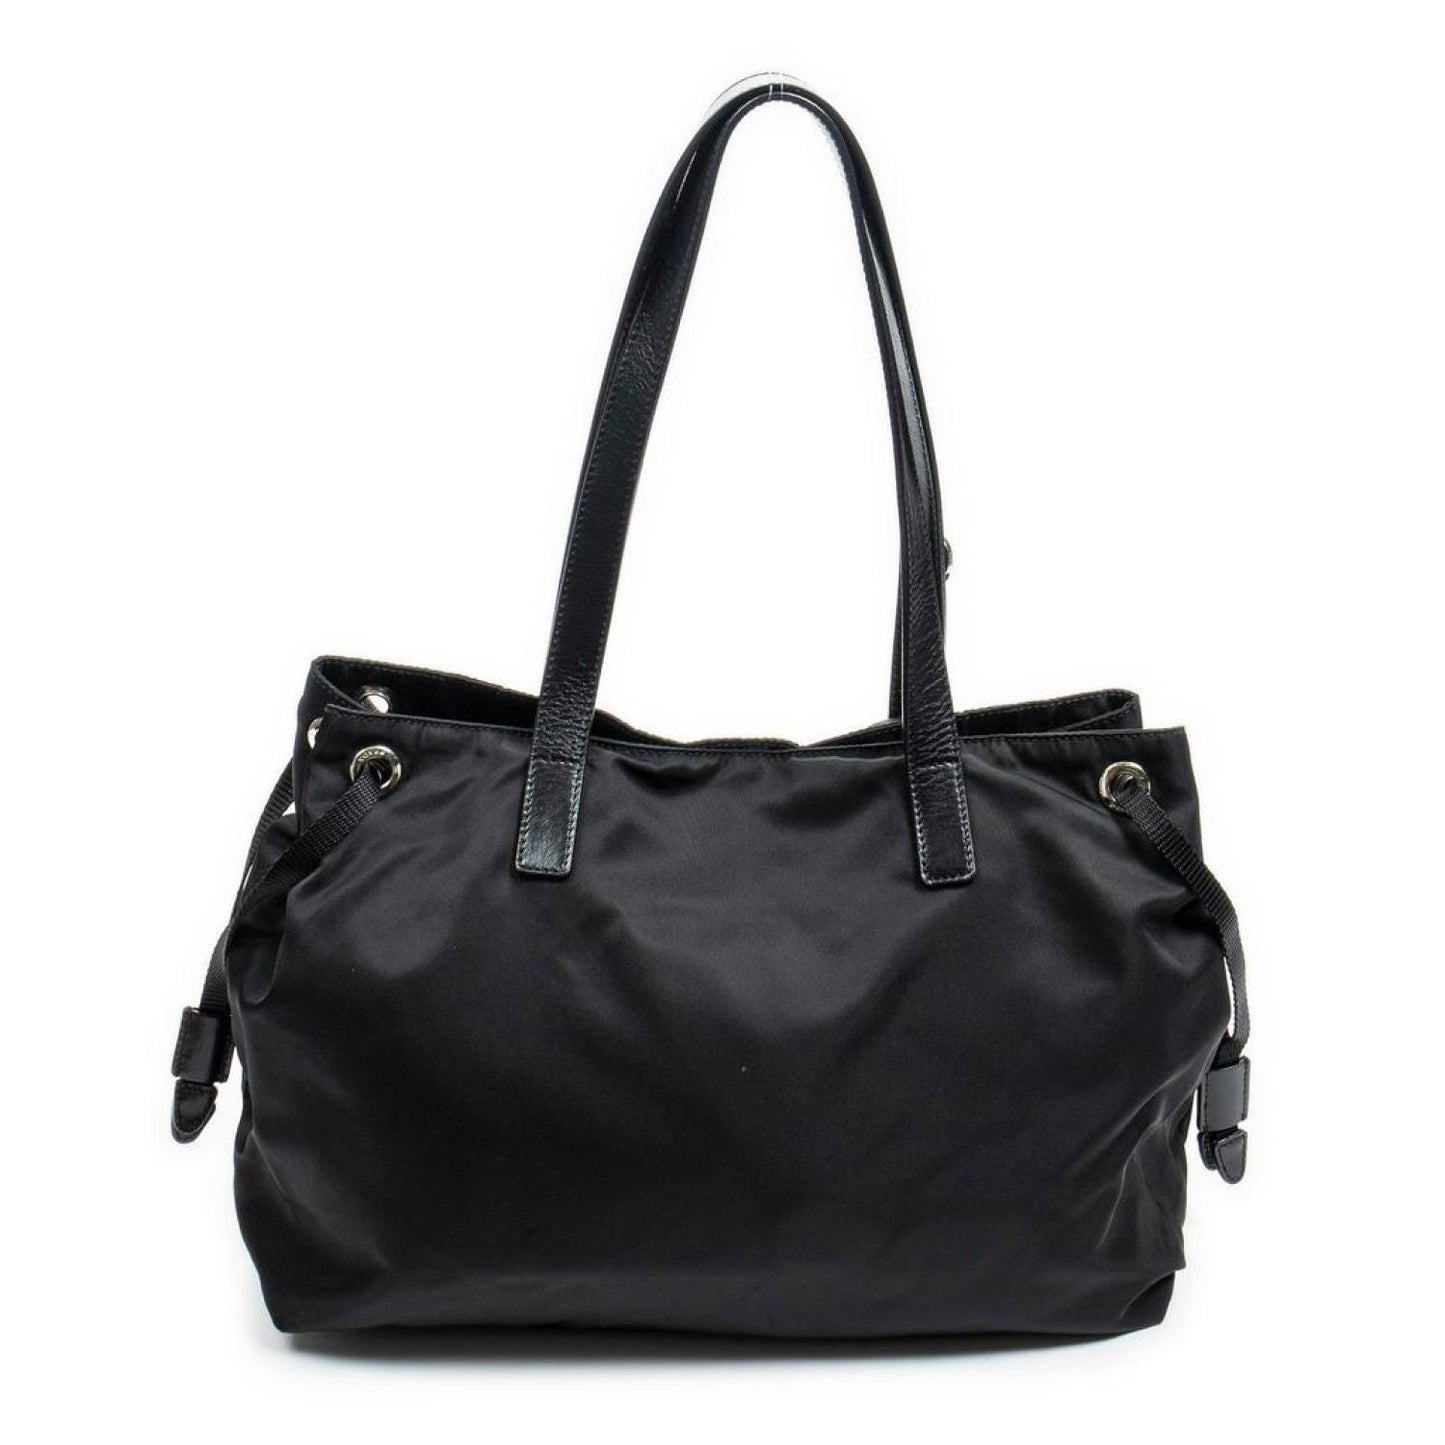 Double Front Pocket Tote